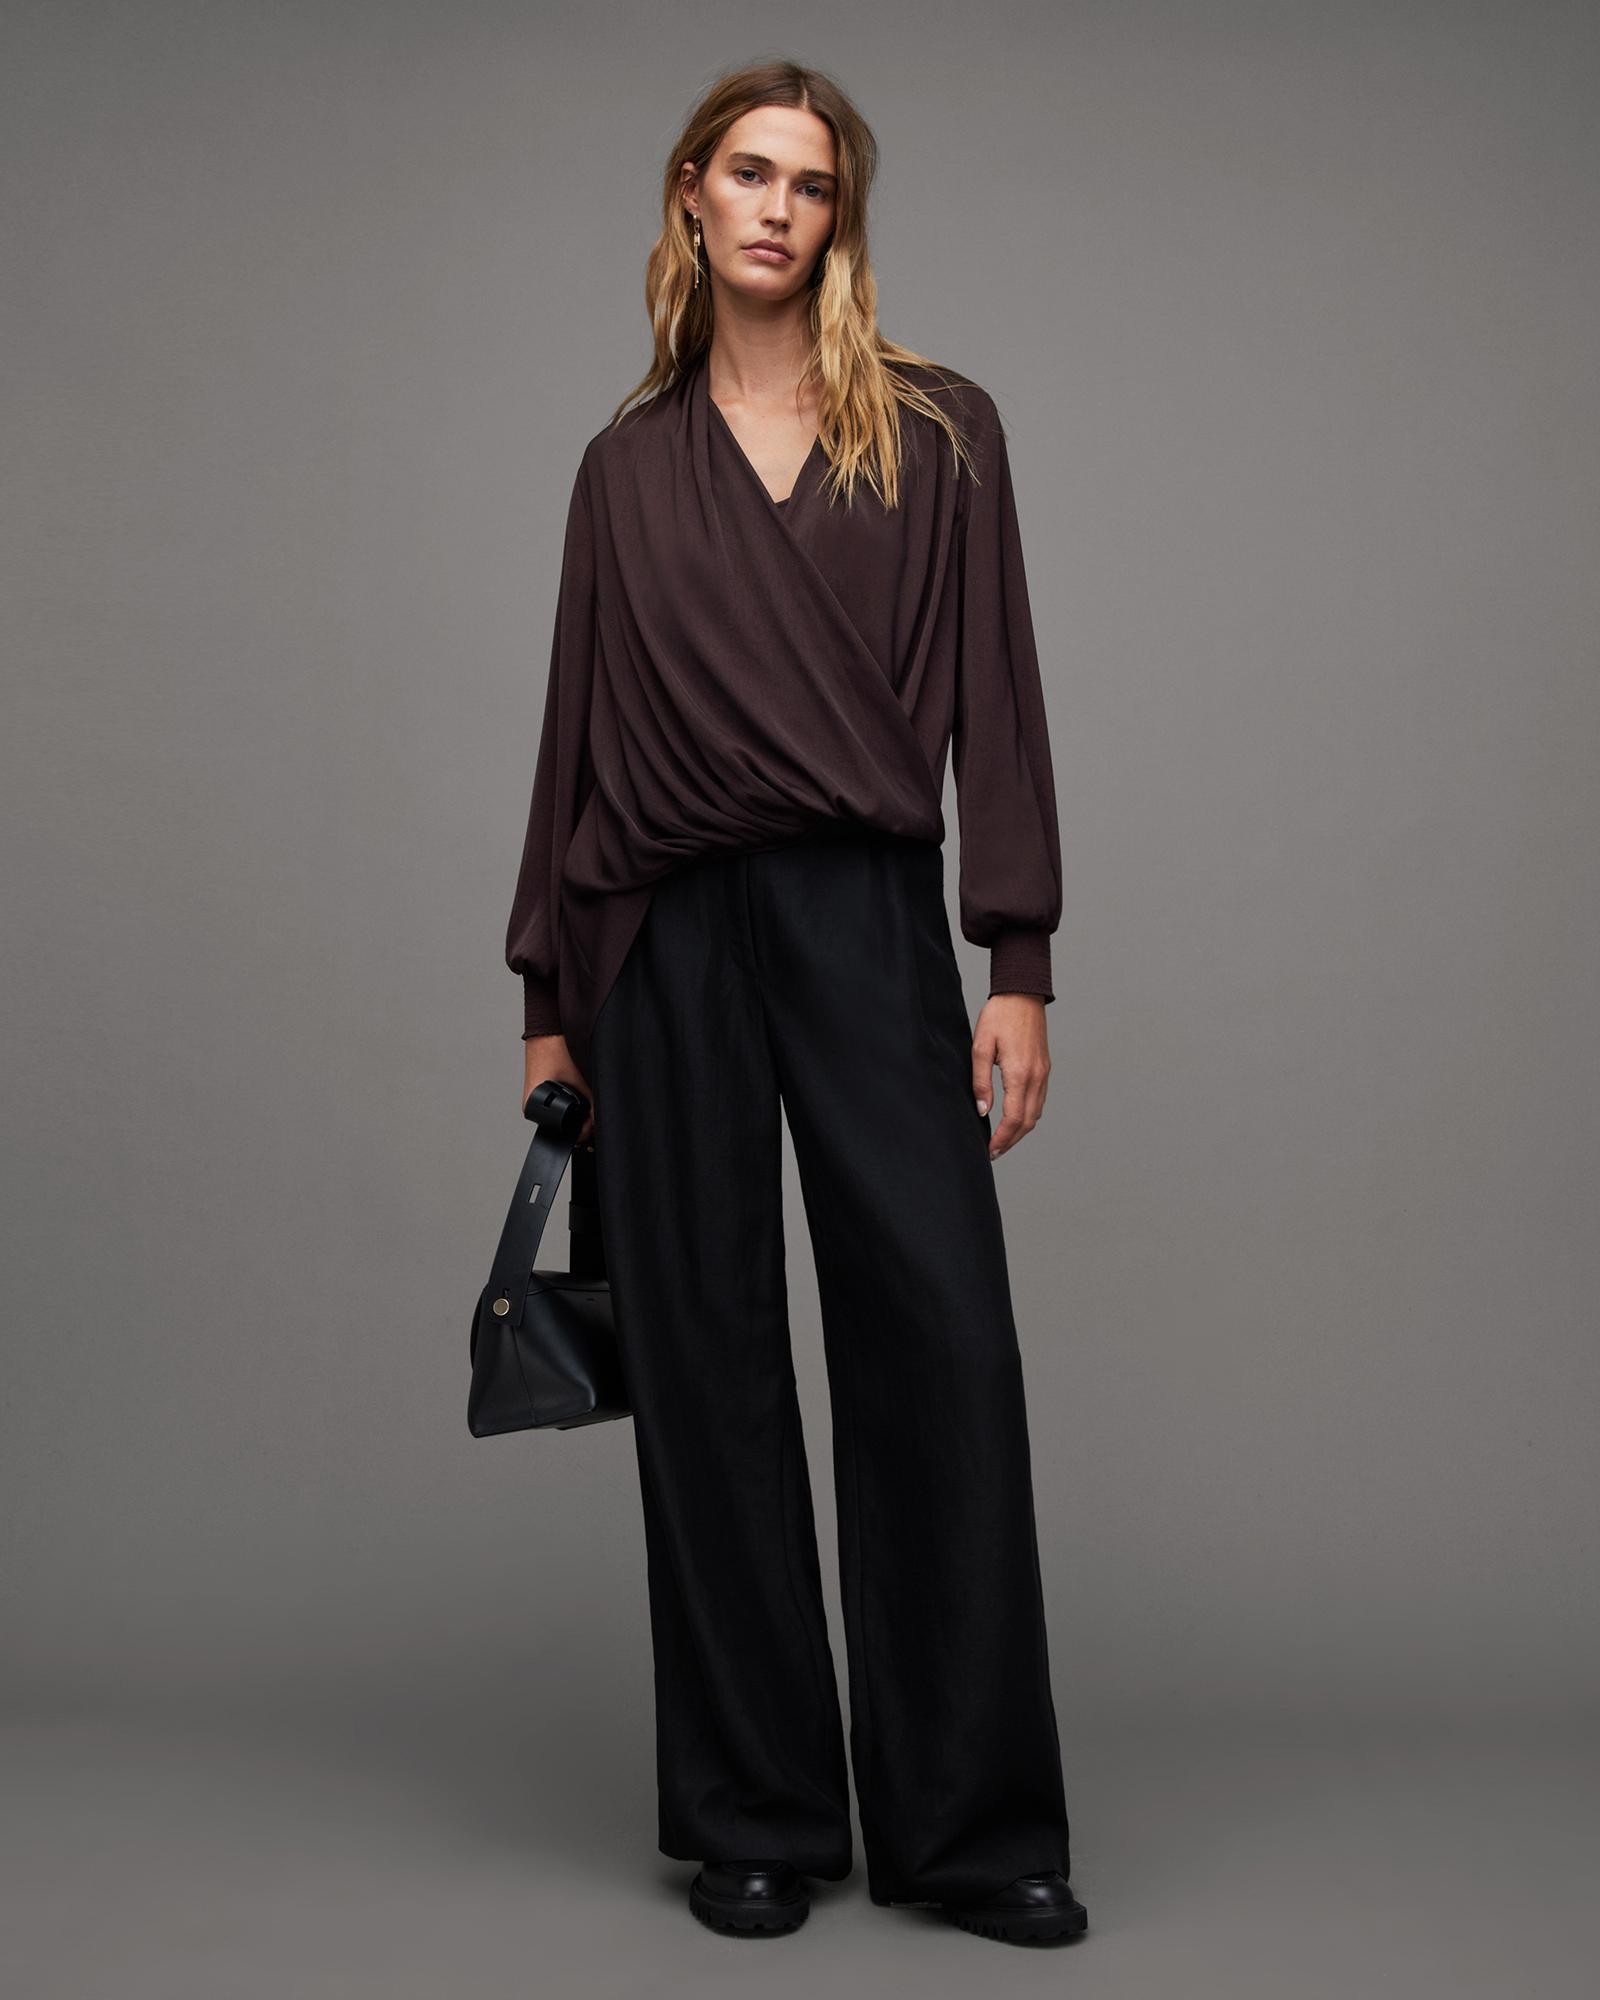 AllSaints Abi Long Sleeve Draped Wrap Over Top Product Image